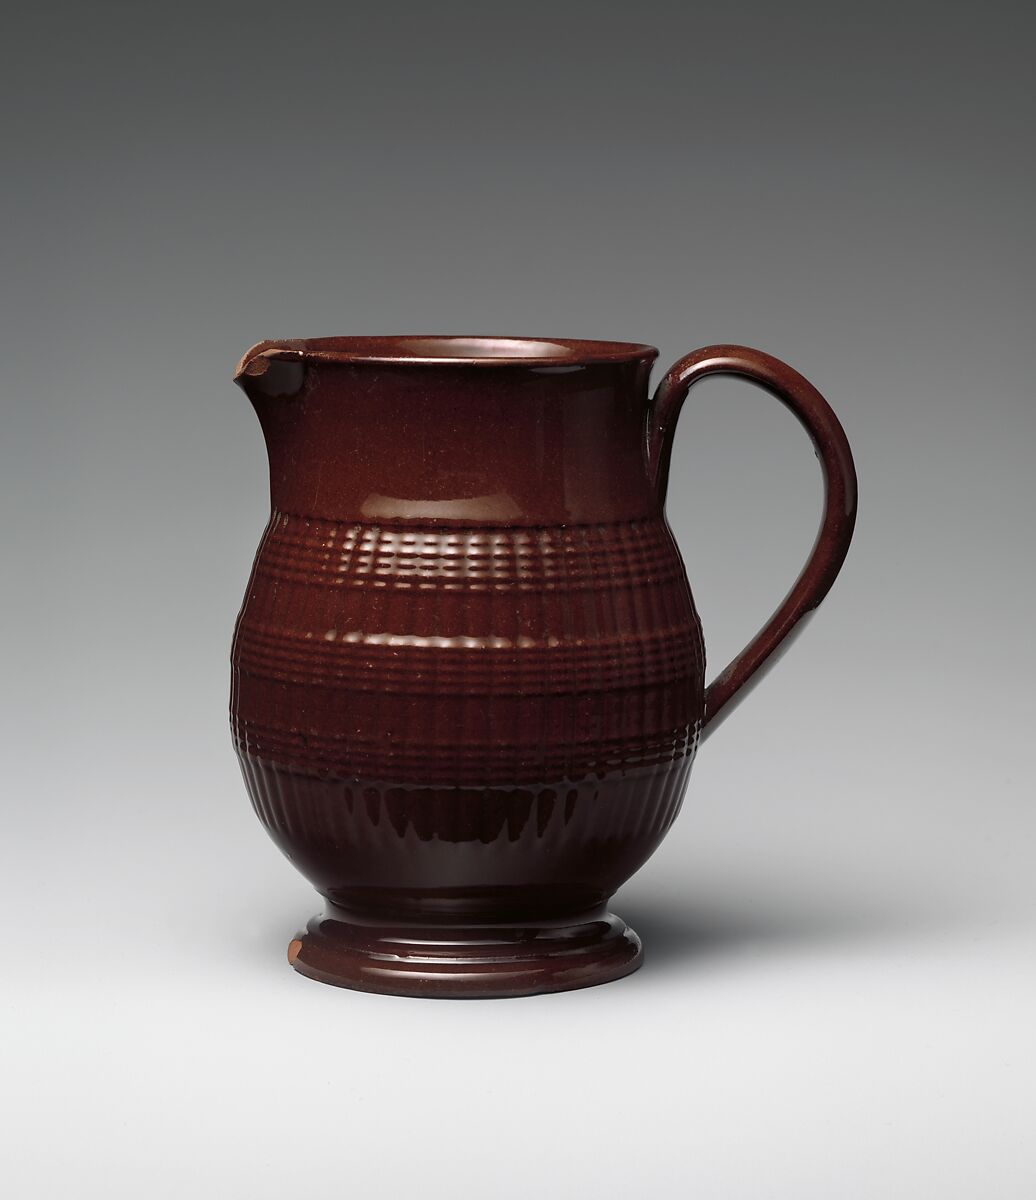 Pitcher, Probably earthenware, American 